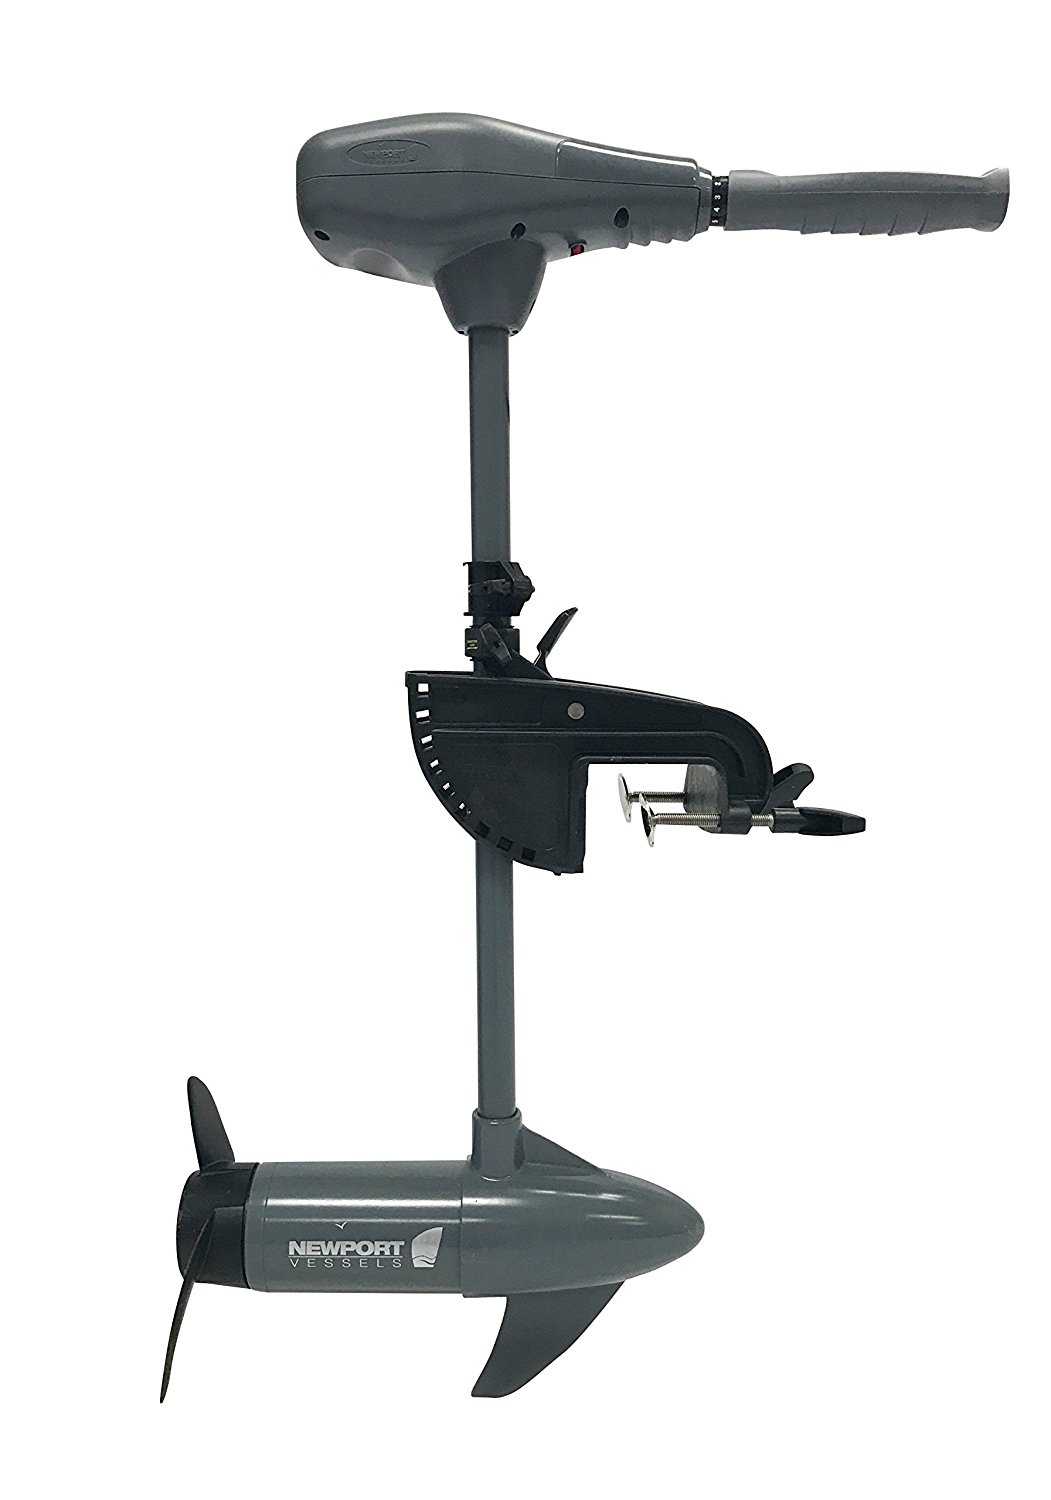 Newport Vessels Kayak Series 55 Lb. Thrust Saltwater Transom Mounted Electric Kayak Trolling Motor with 24 In. Shaft - image 1 of 8